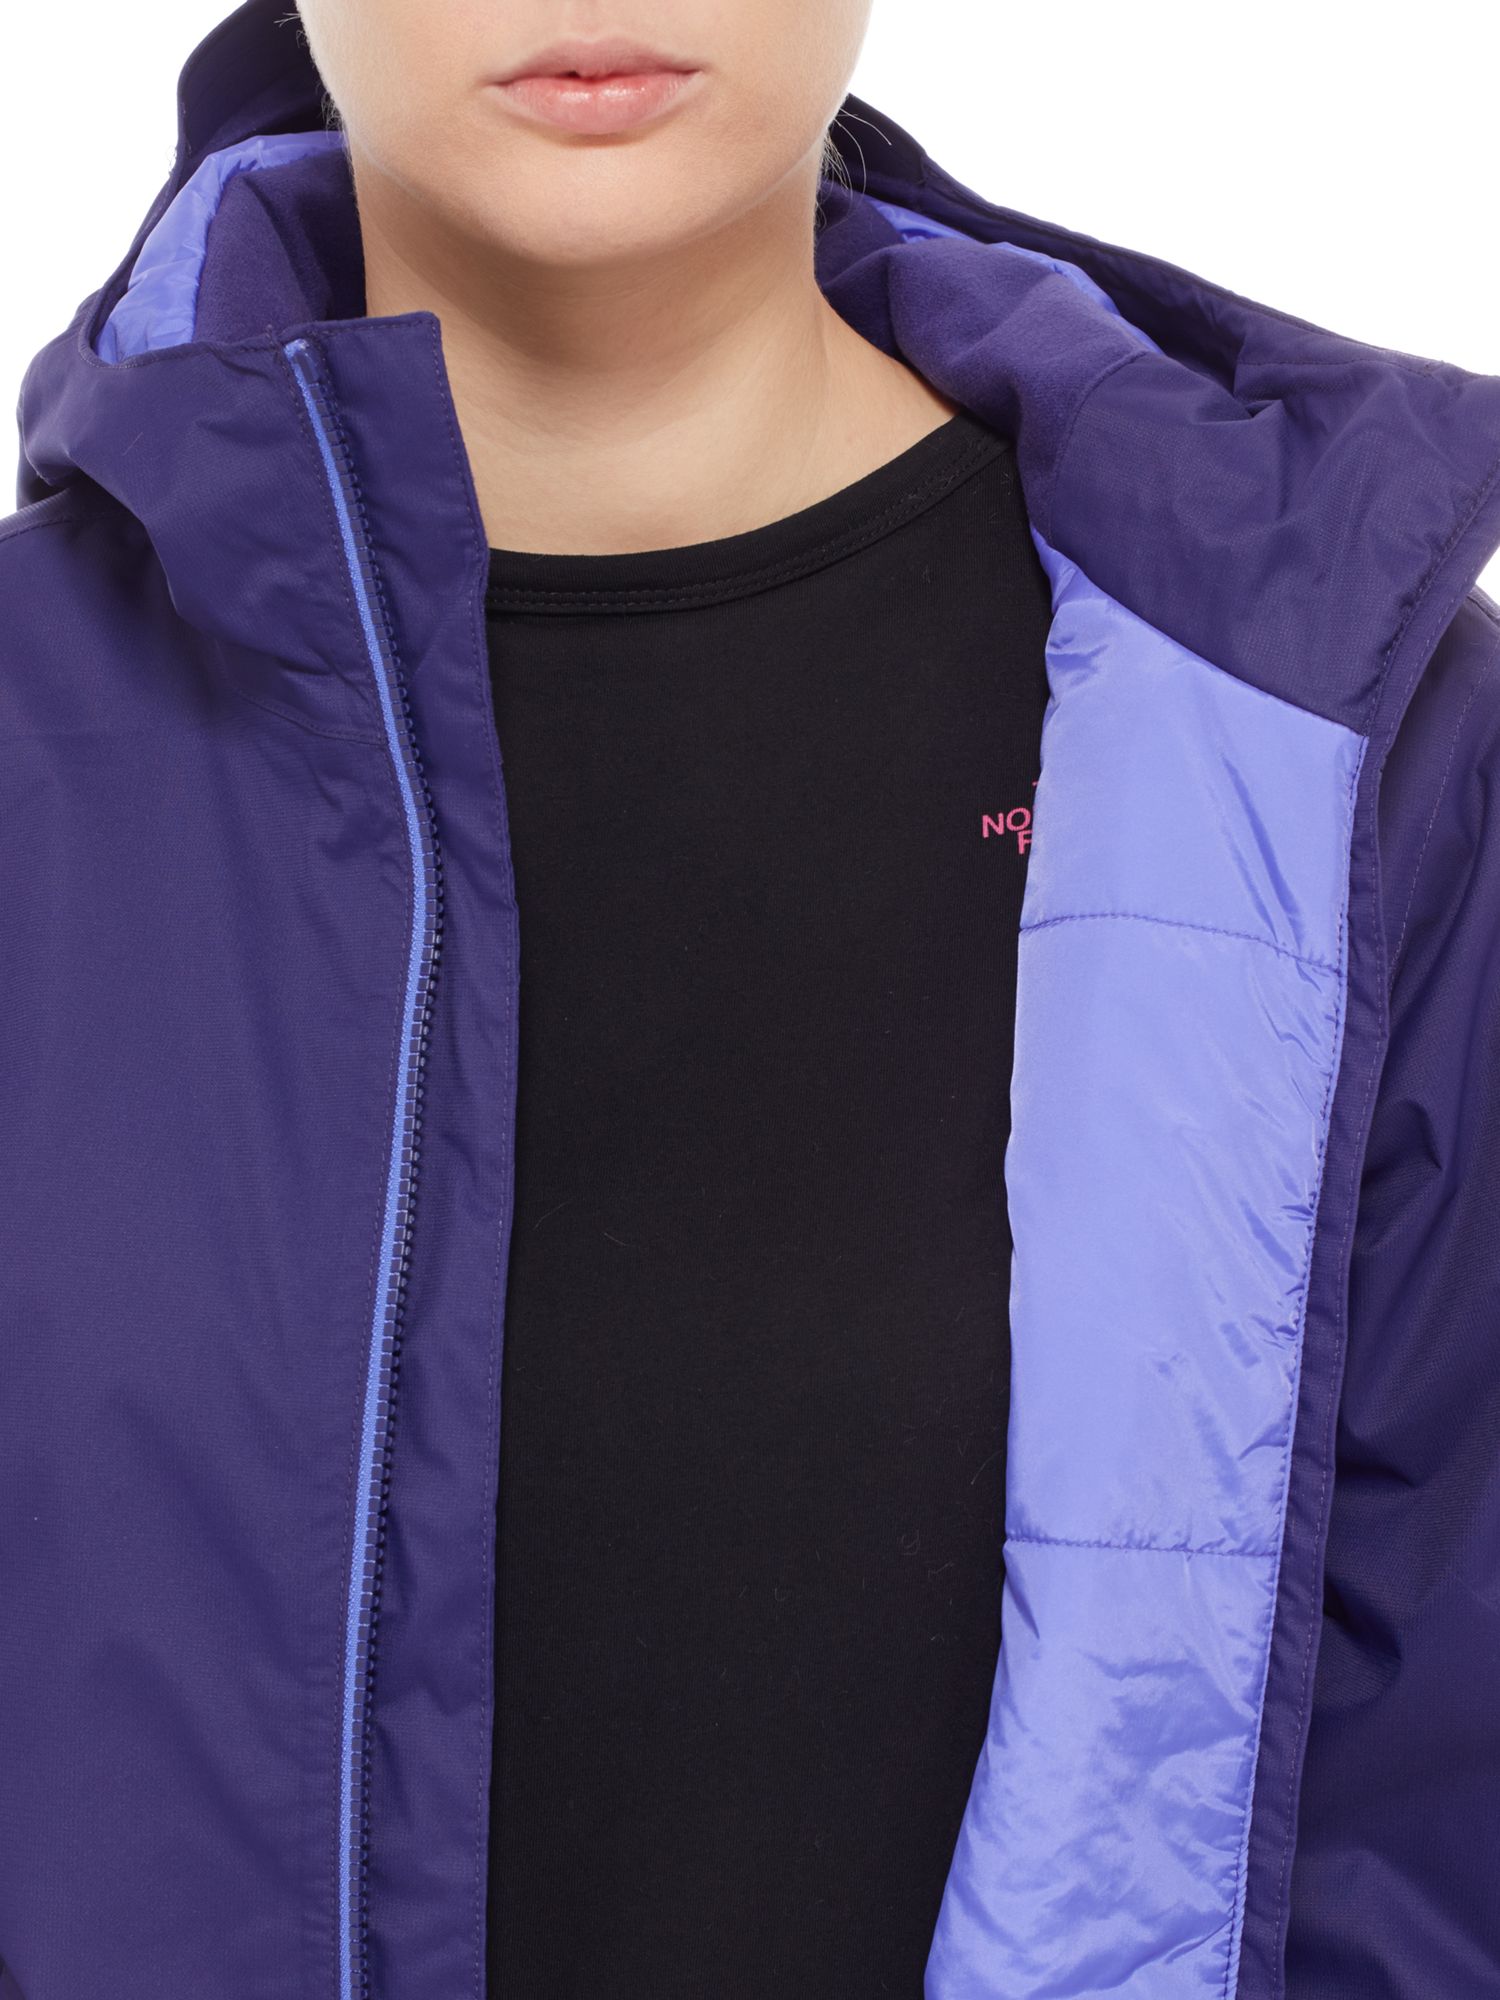 north face insulated womens jacket